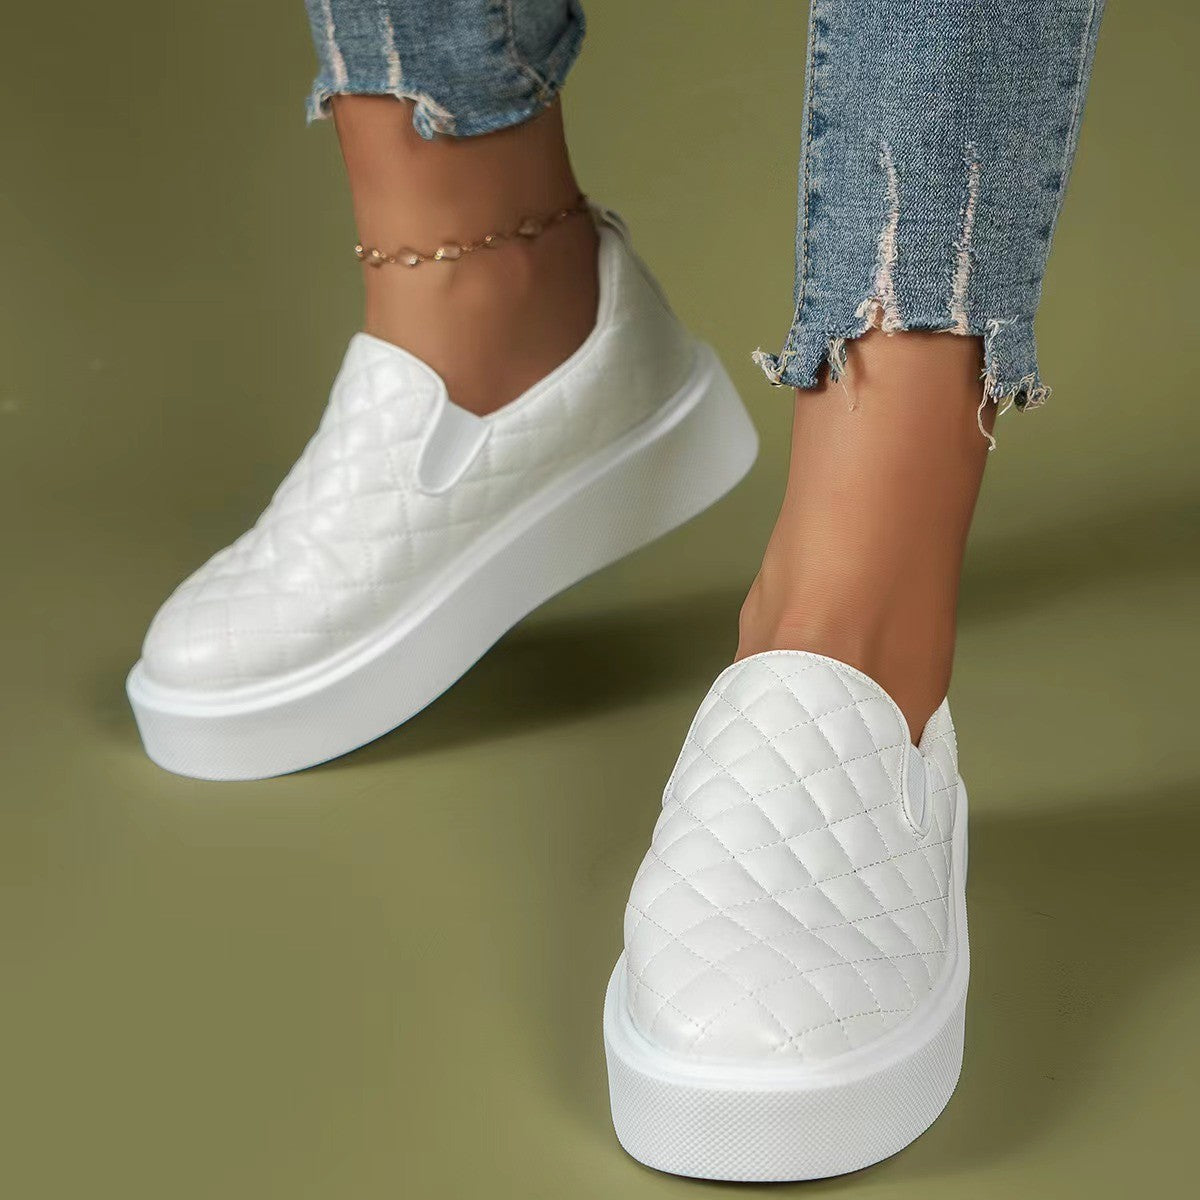 Women's New Round Toe Platform Low Top Casual Shoes